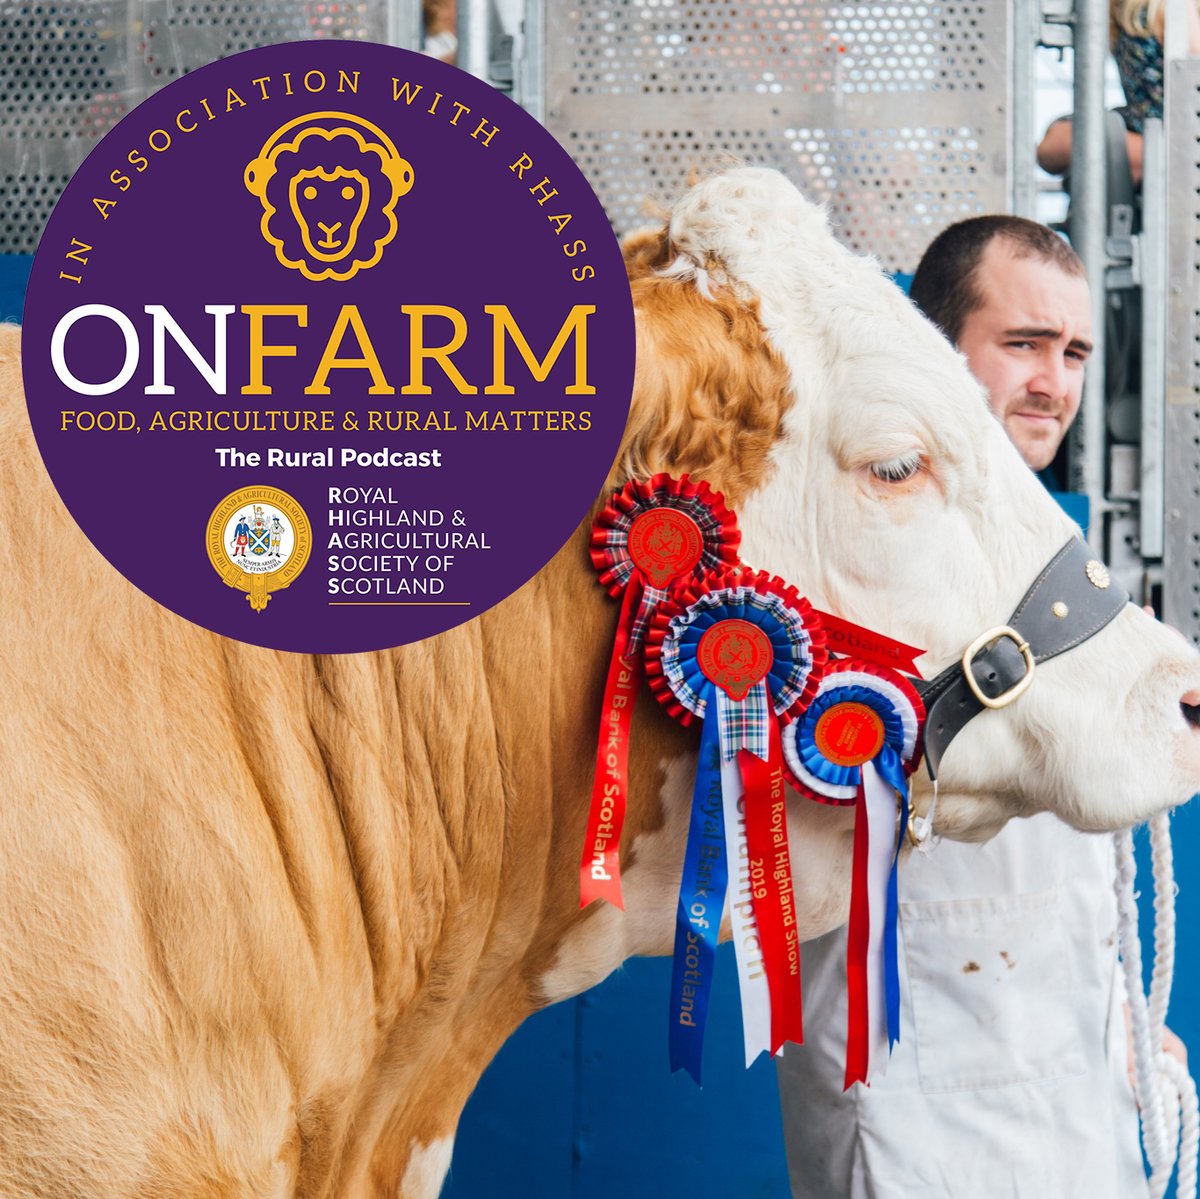 Episode 10: The Livestock Ring and the Trophy RoomIt takes time, passion, & painstaking commitment to get a beast ready for the  @ScotlandRHShow ring. It can be the culmination of a life's work. Montyhears from some of Scotland's best handlers. https://www.podfollow.com/onfarm/episode/3b43cbbe9869926da55d1003d981d1bc8bdfa4a1